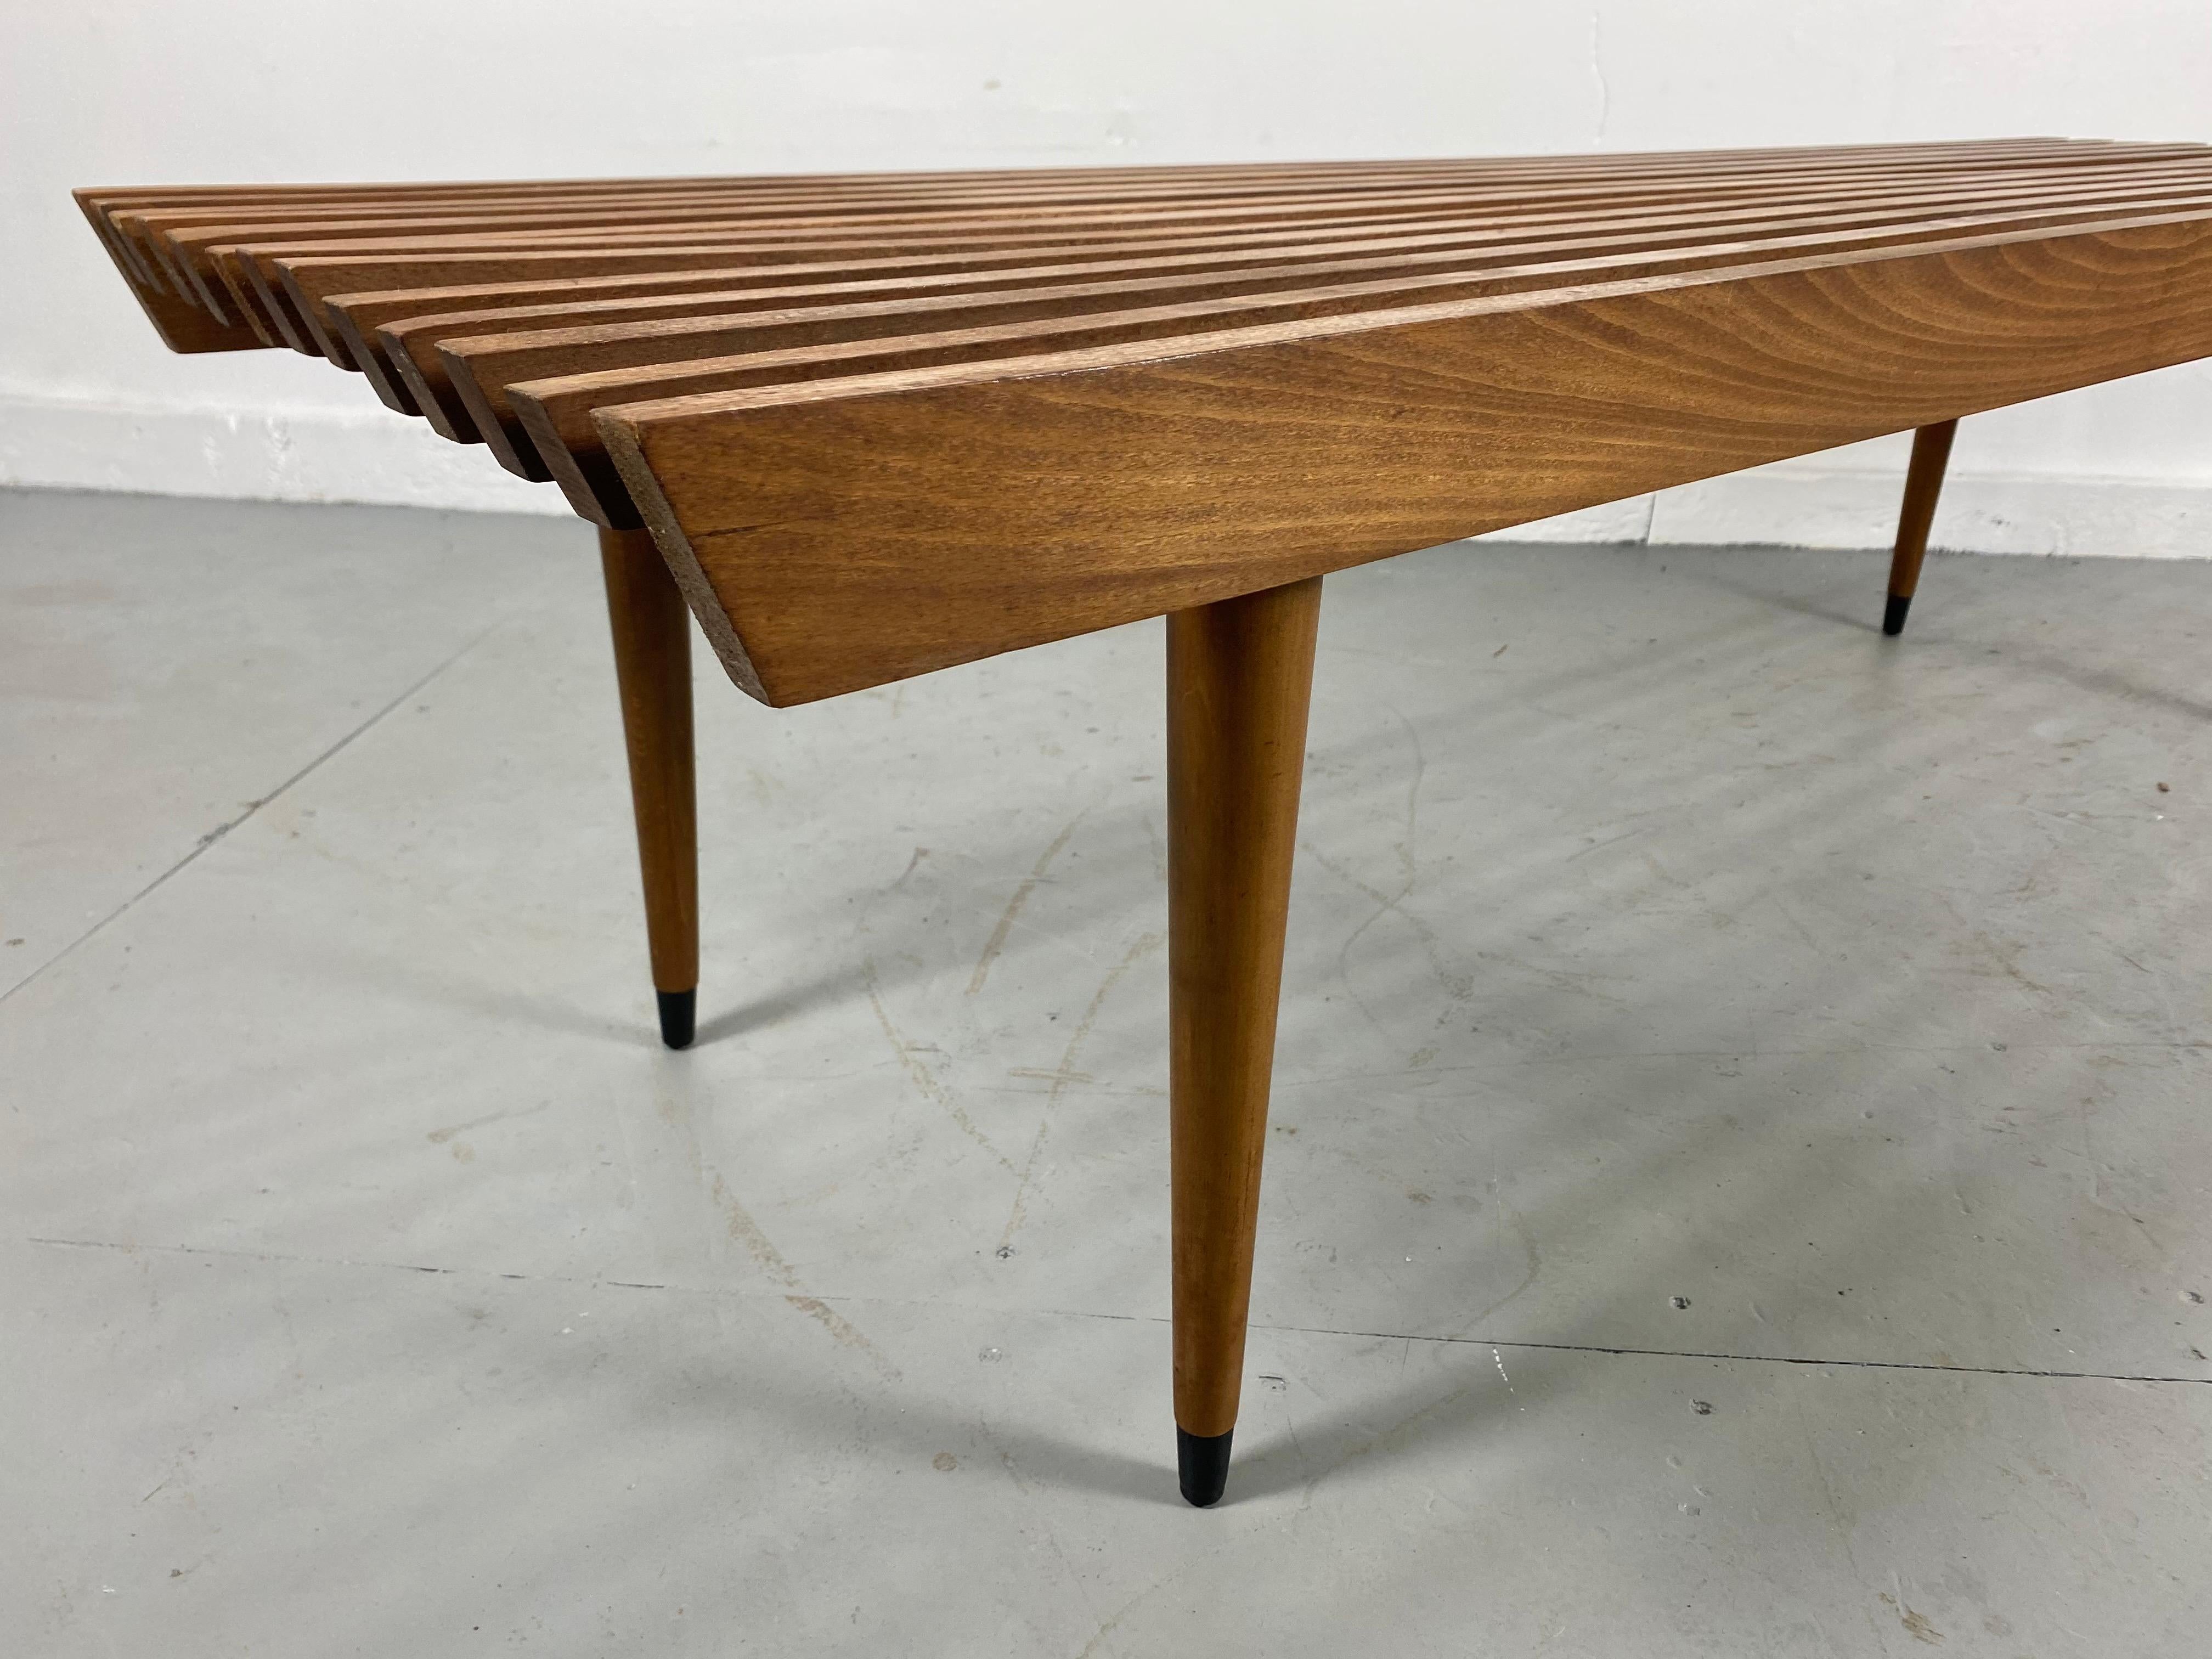 Classic Mid-Century Modern slat bench / table with tapered legs, 1960's, most likely Italian or Yugoslavian? wonderful grained walnut, nice original condition, patina, slight warping to a couple of wooden slats (see photo) hardly noticeable.